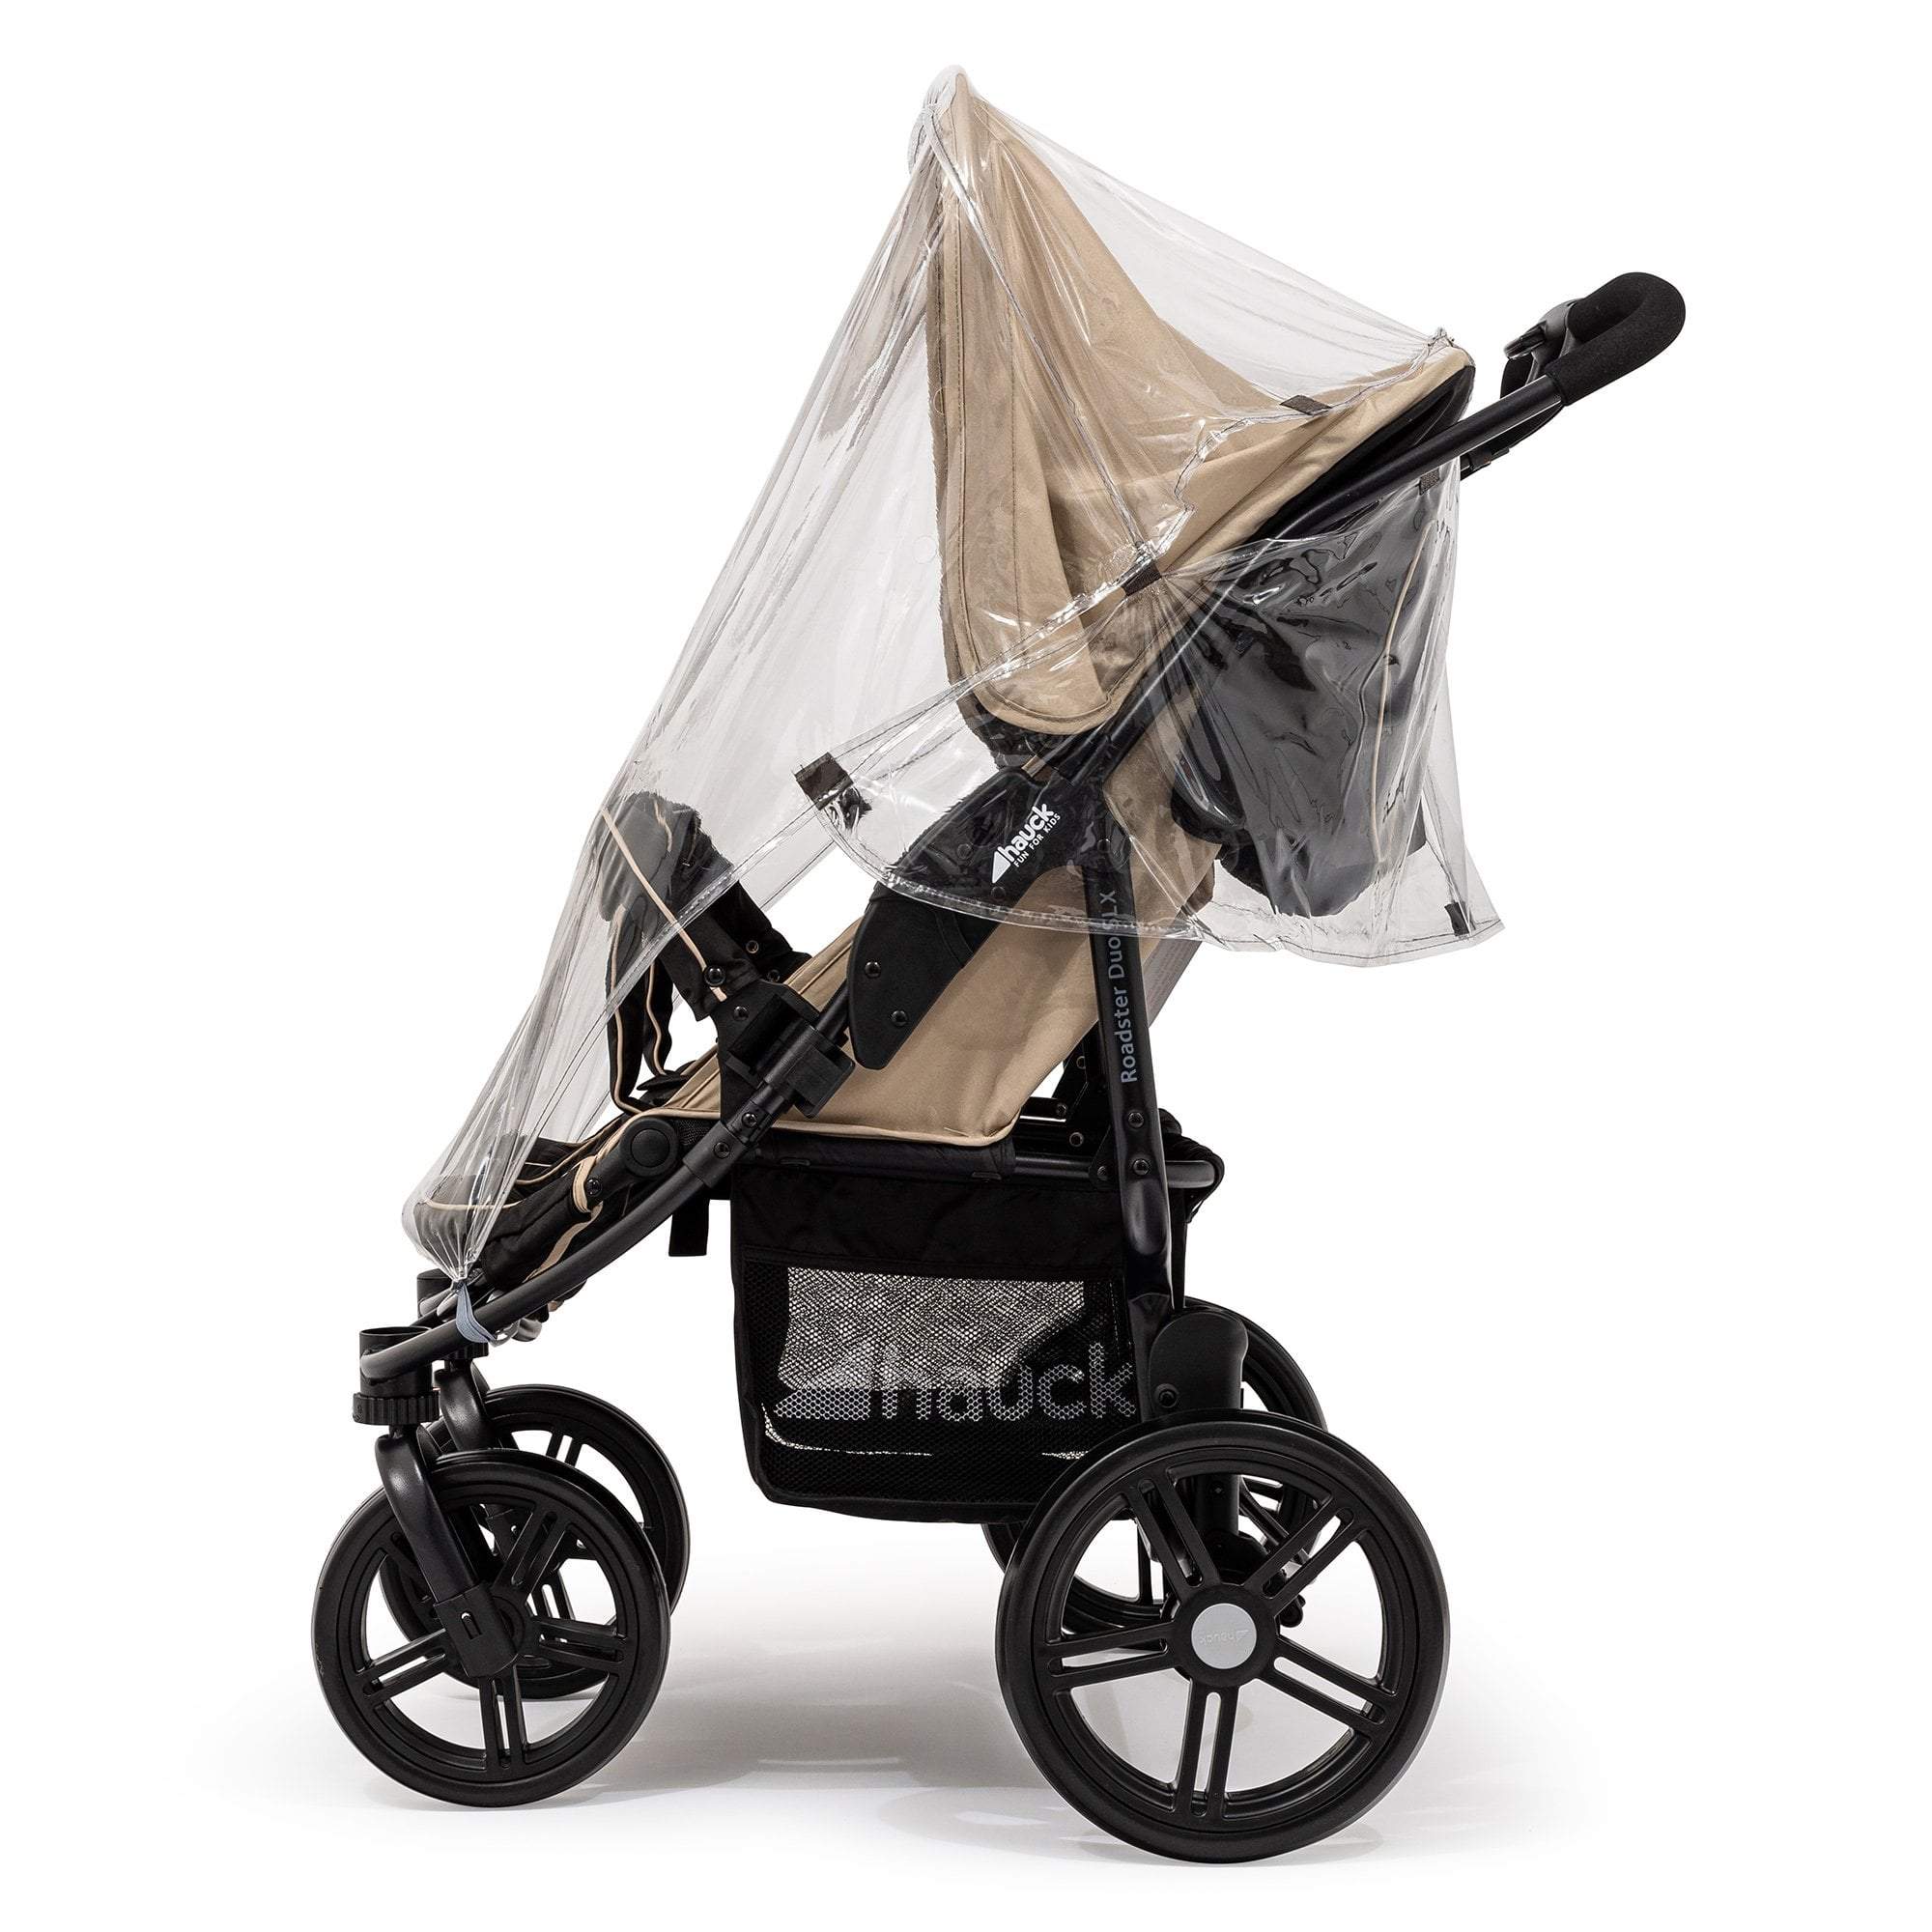 Side by Side Raincover Compatible with Babywelt - For Your Little One